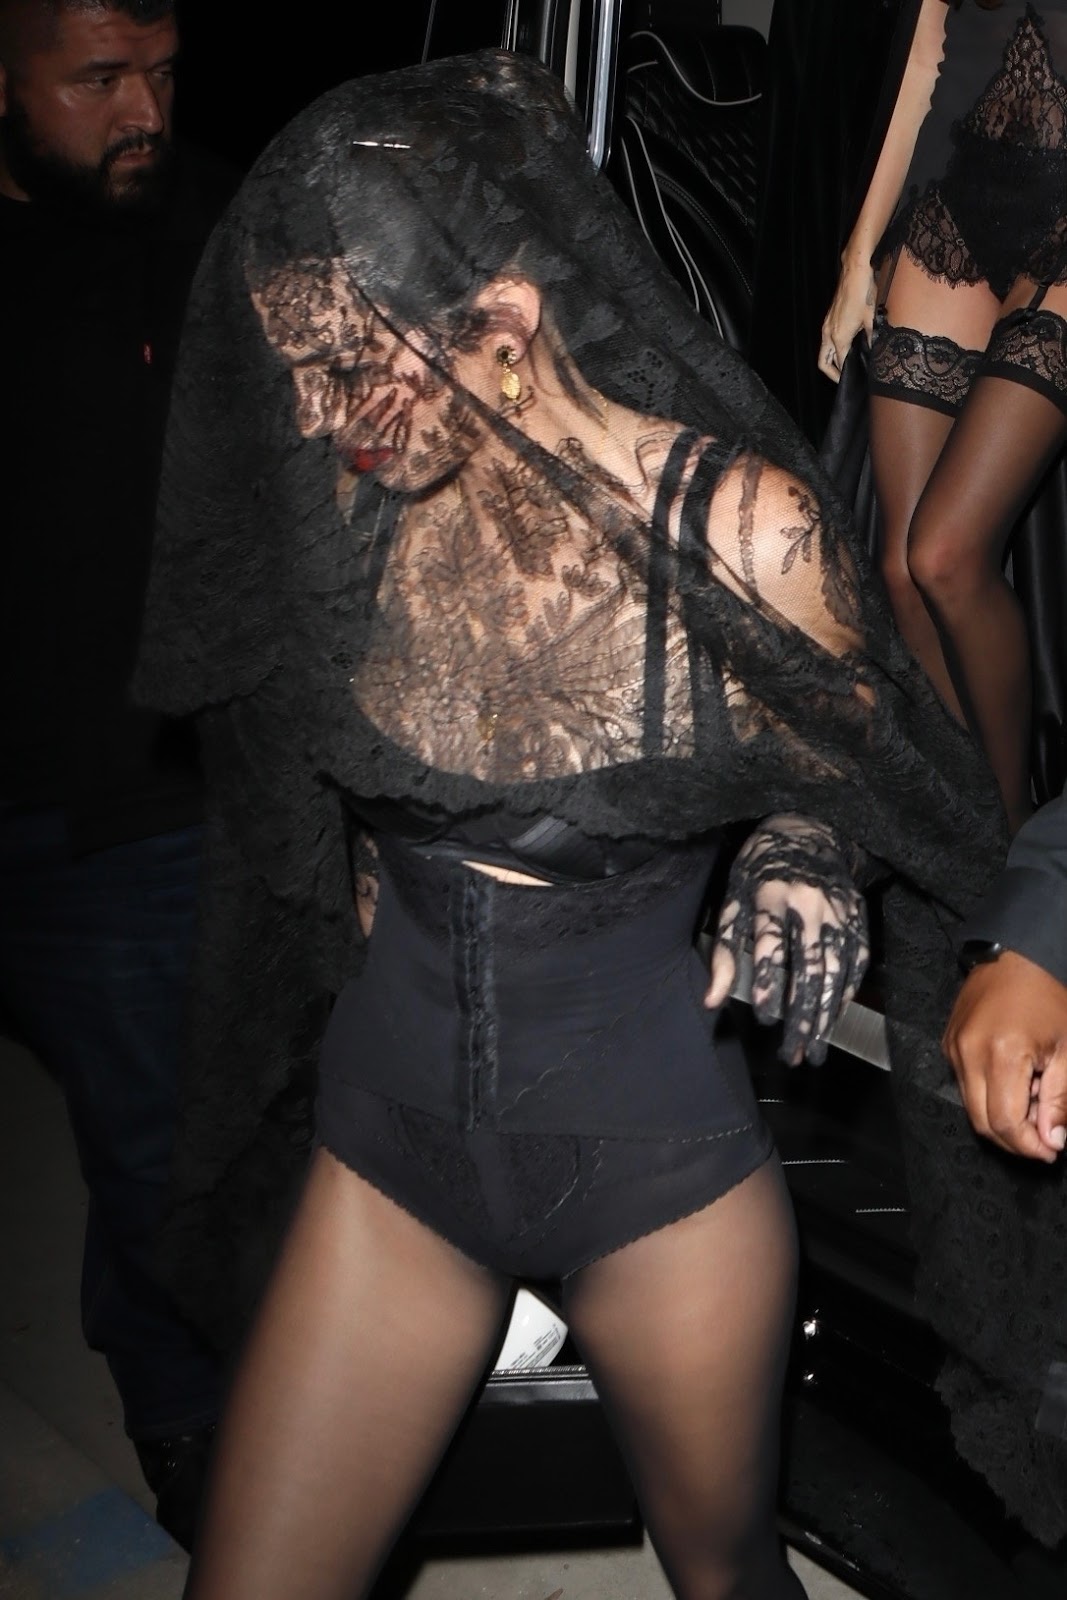 Kendall Jenner arriving at “La Notte Degli Occhi” themed 27th Birthday party in West Hollywood.